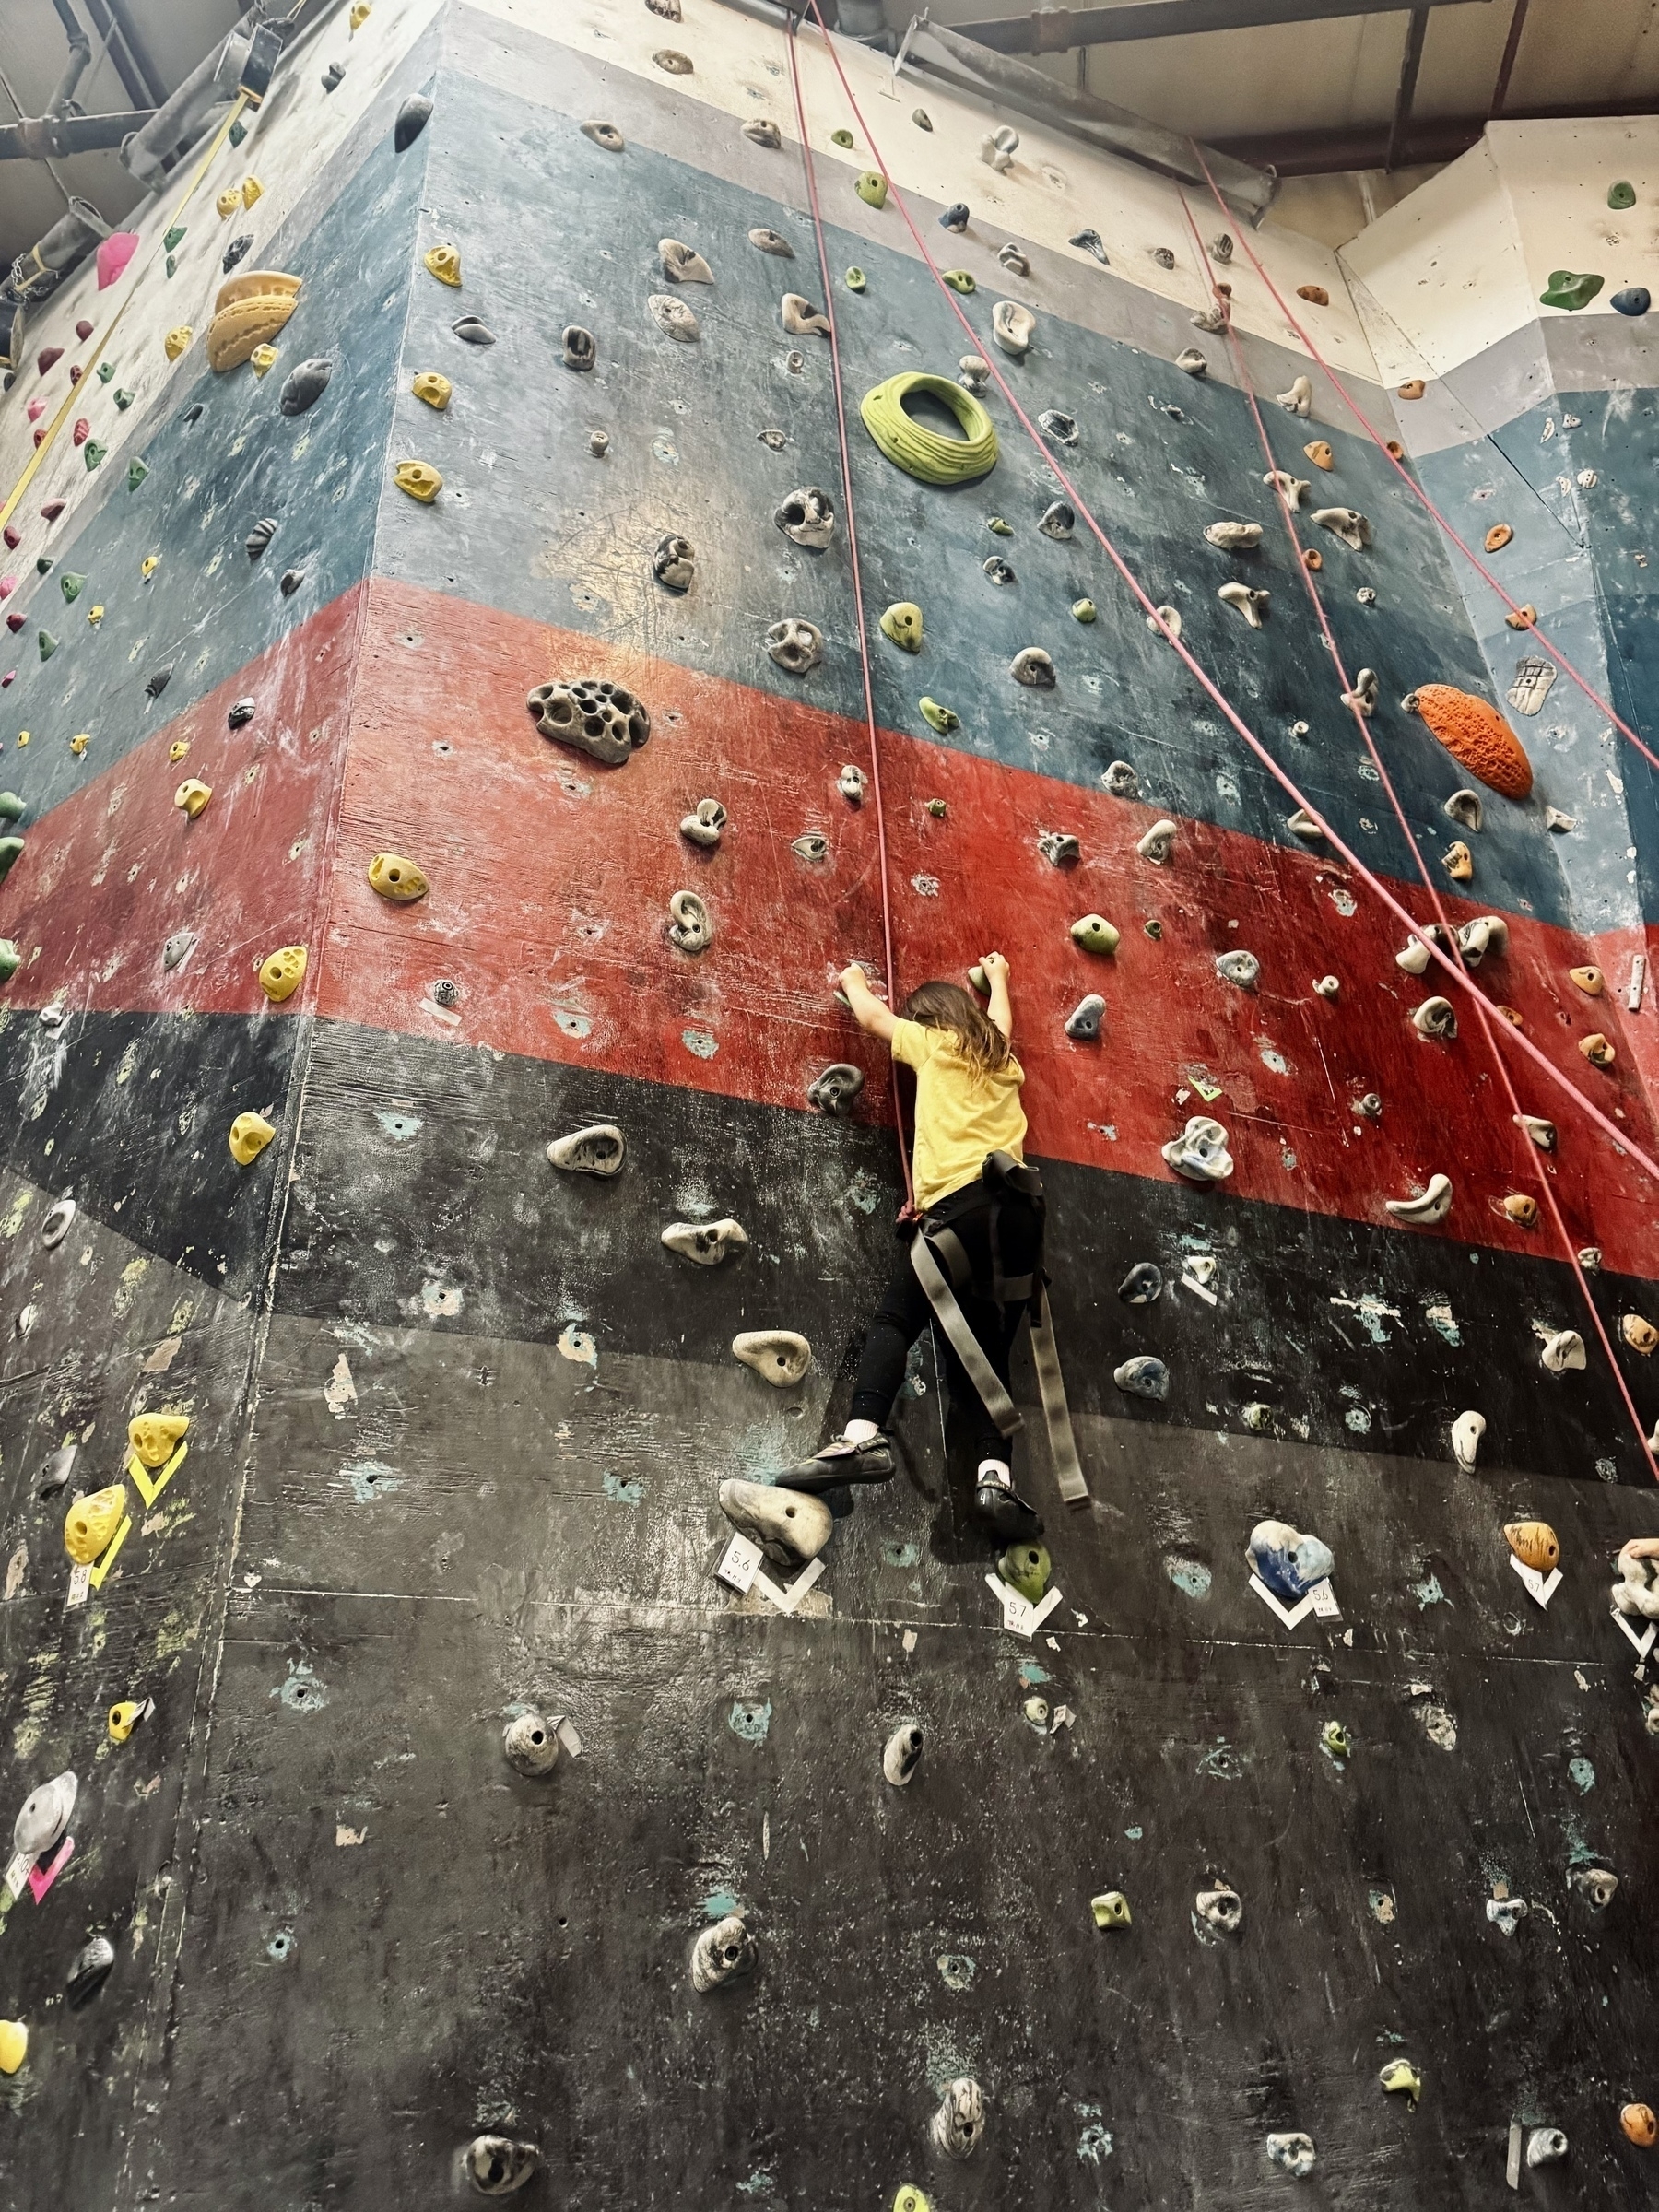 A person wearing a yellow top is climbing an indoor rock wall with various colored holds and routes.